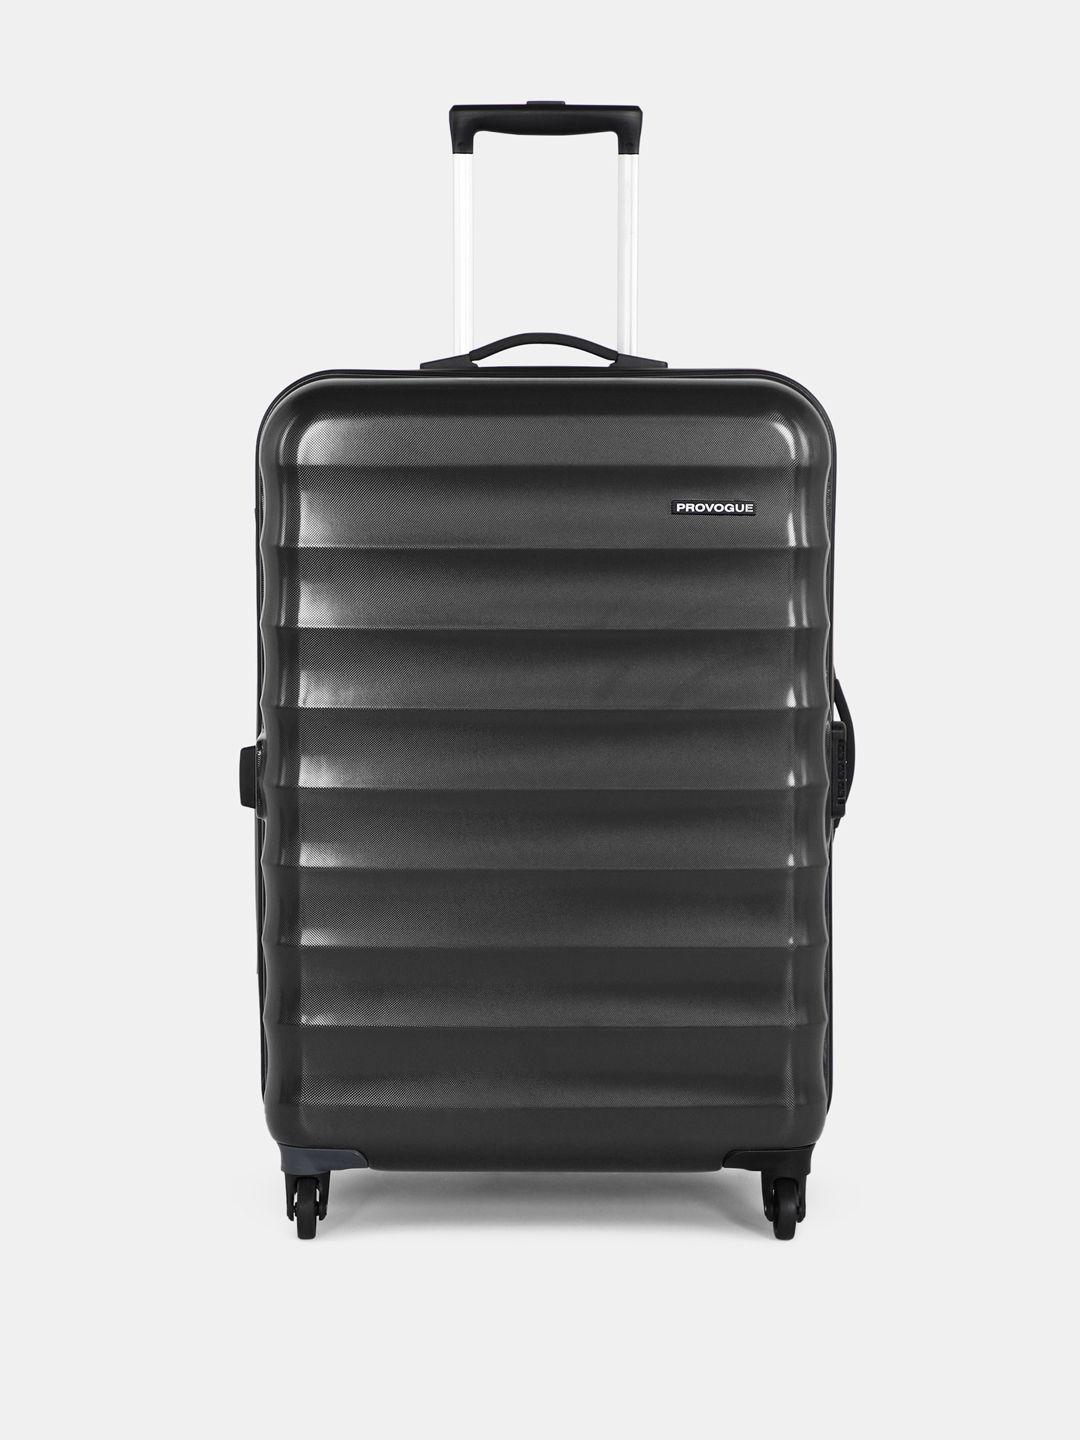 provogue textured large trolley suitcase